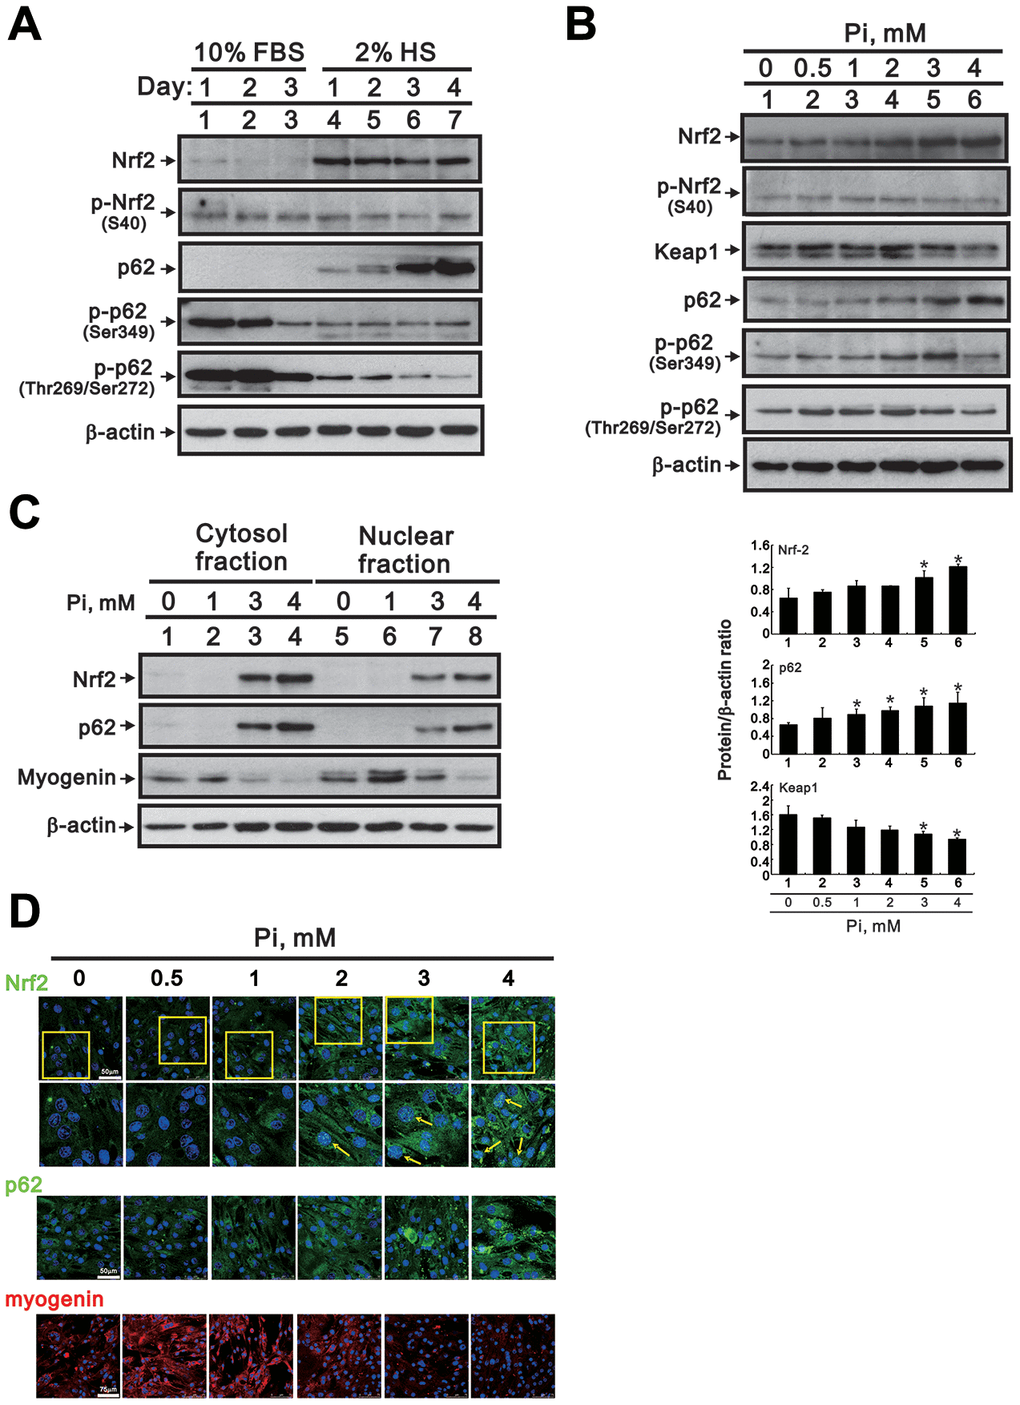 High Pi activates signaling pathways associated with oxidative stress in differentiated C2C12 cells. (A) Representative Nrf2 and p62 immunoblots from whole-cell lysates prepared from proliferating and differentiated C2C12 cells. β-actin was used as loading control. (B) Representative immunoblots (upper panel) and densitometric analysis (lower panel) of Nrf2, Keap1, and p62 expression in whole-cell lysates from 3-day-differentiated C2C12 cells treated for 24 h with the indicated Pi concentrations. Data are presented as means ± SEM. *P C) Representative immunoblots of cytosolic and nuclear Nrf2, p62, and myogenin expression in 3-day-differentiated C2C12 cells treated for 24 h with the indicated Pi concentrations. (D) Representative confocal micrographs of Nrf2 (green), p62 (green) and myogenin (red) immunofluorescence in differentiated C2C12 cells treated with the indicated Pi concentrations. Nuclei were stained using DAPI (blue). The boxed areas within Nrf2 staining images are reproduced at higher magnification in the panels immediately below. Arrows highlight positive nuclear Nrf2 expression.